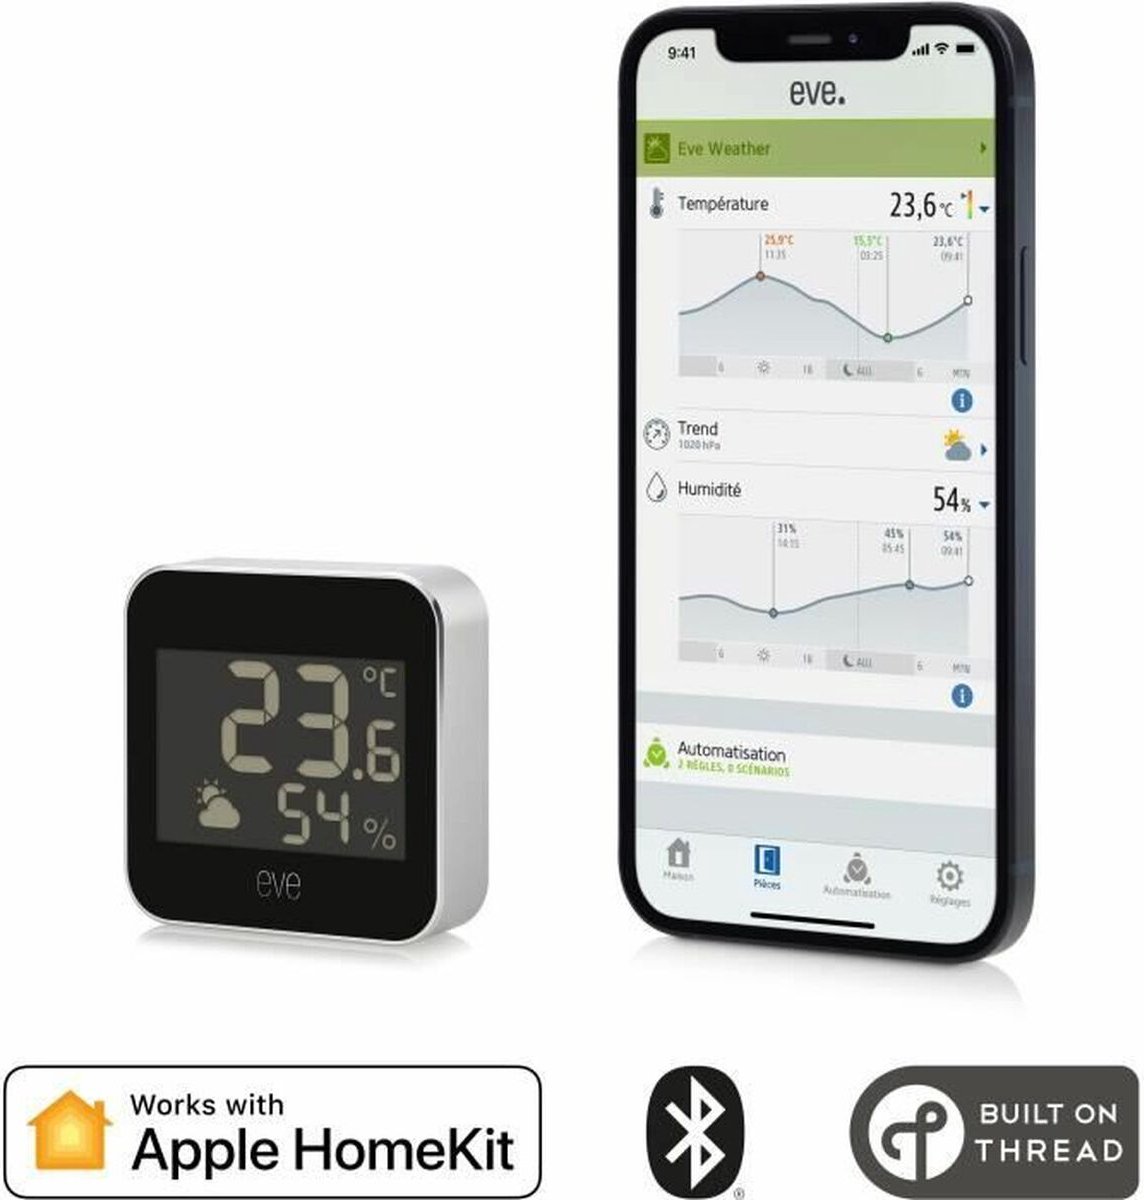 Eve Weather - Connected Weather Station with Apple HomeKit technology